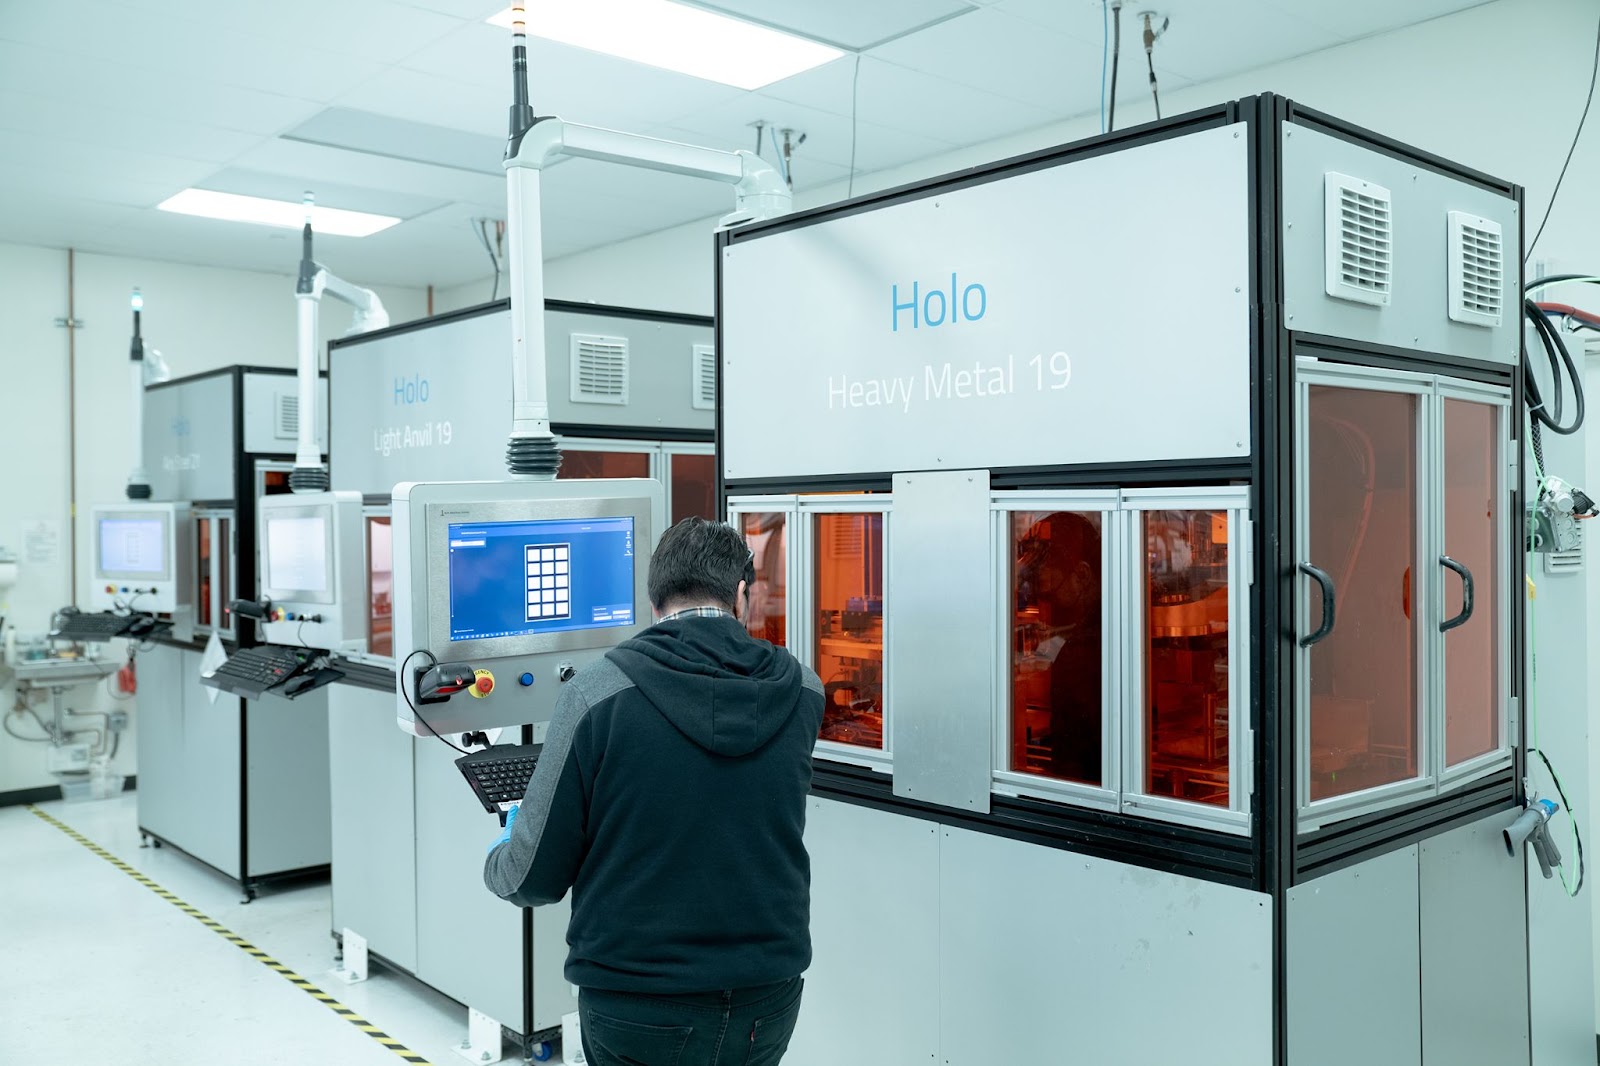 A 3D printer operator interacts with the control screen on one of Holo's PureForm™ metal 3D printers, with two more printers from the Holo fleet in the background